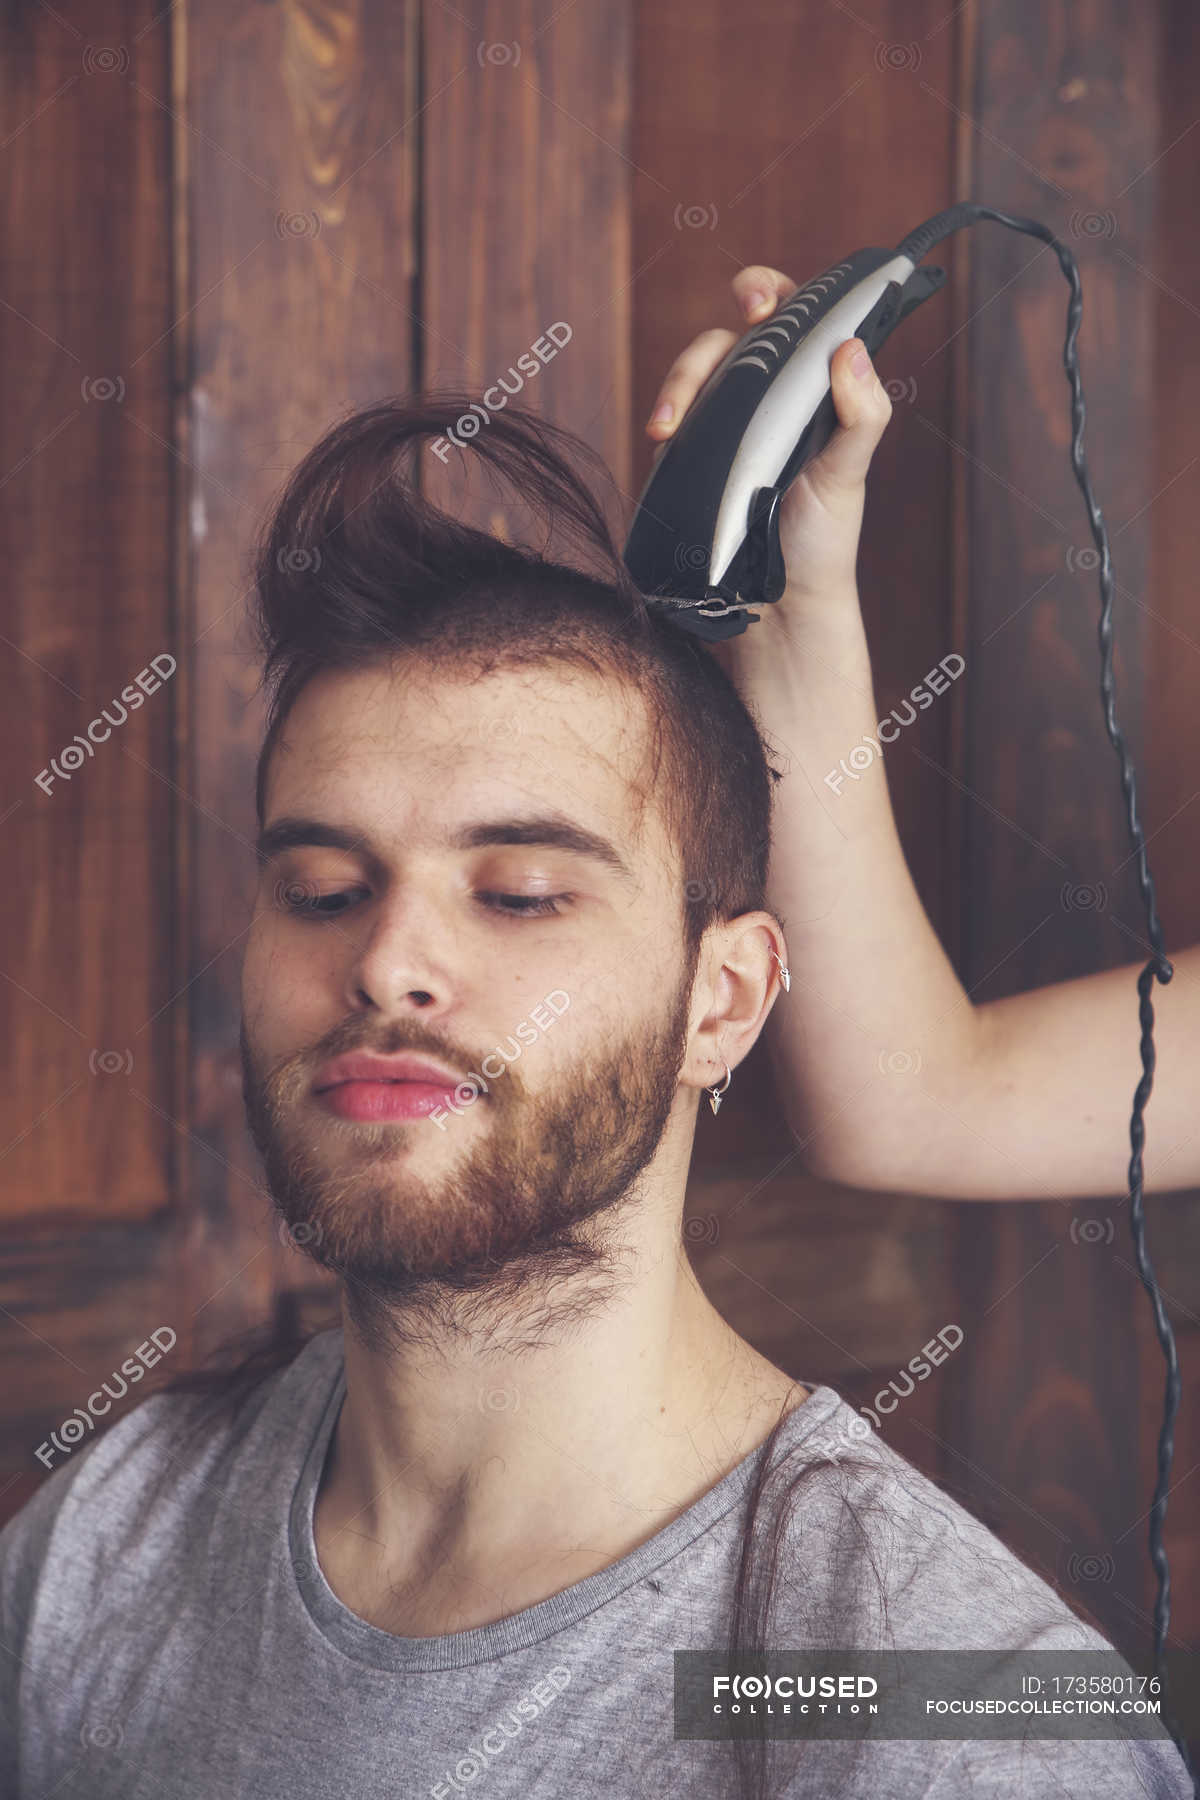 Portrait of young man getting a haircut by his girlfriend with hair cutting  machine — beard, quiff - Stock Photo | #173580176